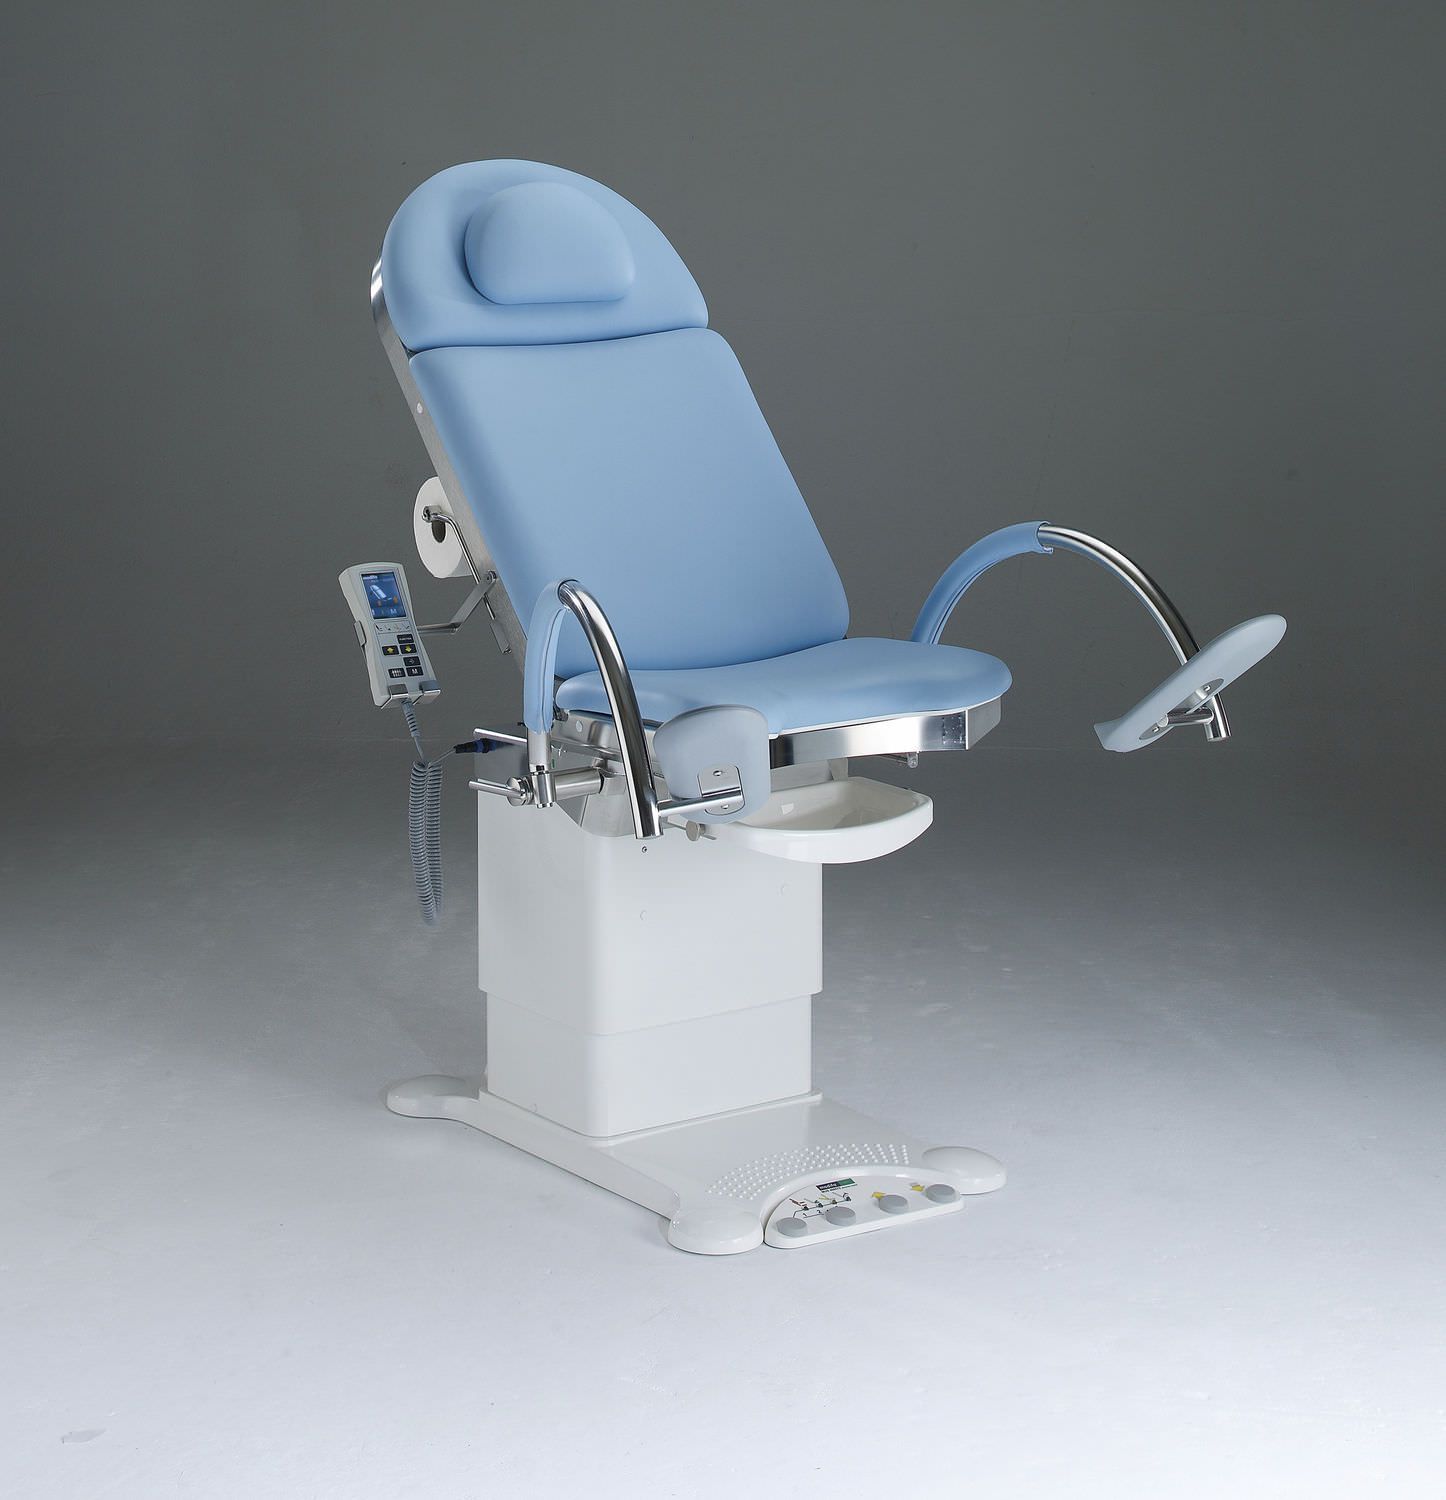 Gynecological examination chair / electrical / 2-section 400550 medifa-hesse GmbH & Co. KG